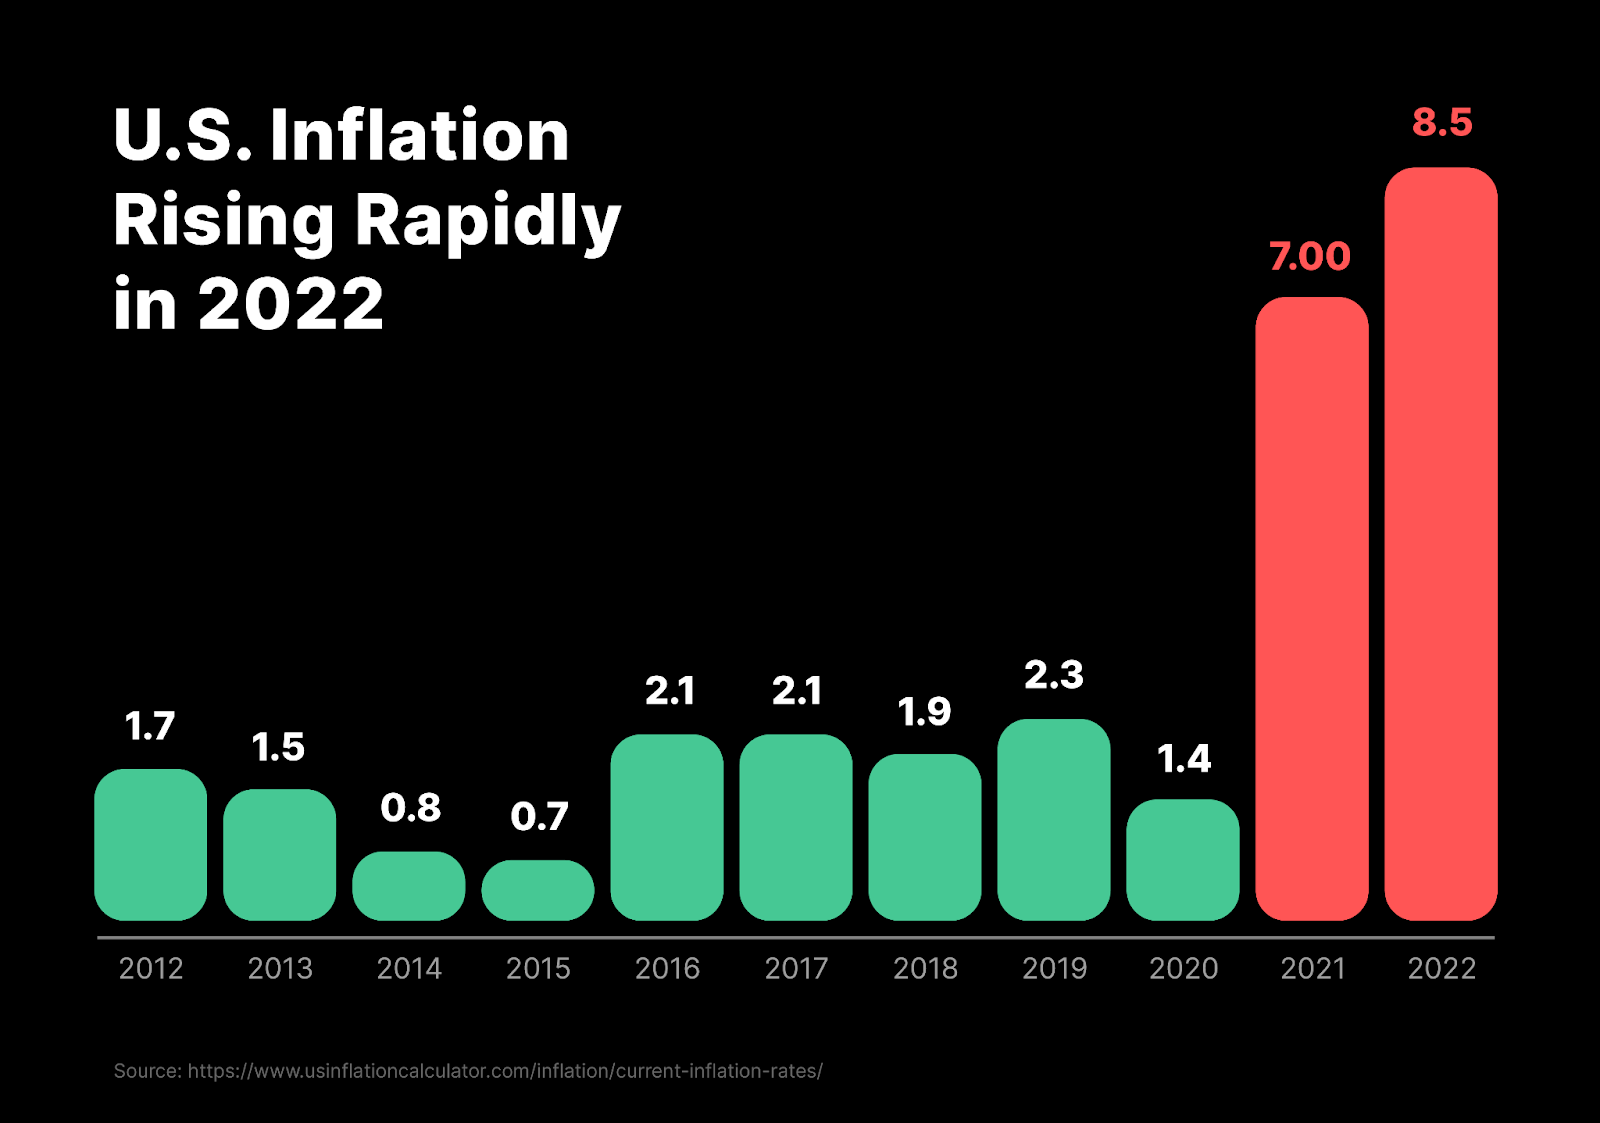 U.S. inflation rising rapidly in 2022